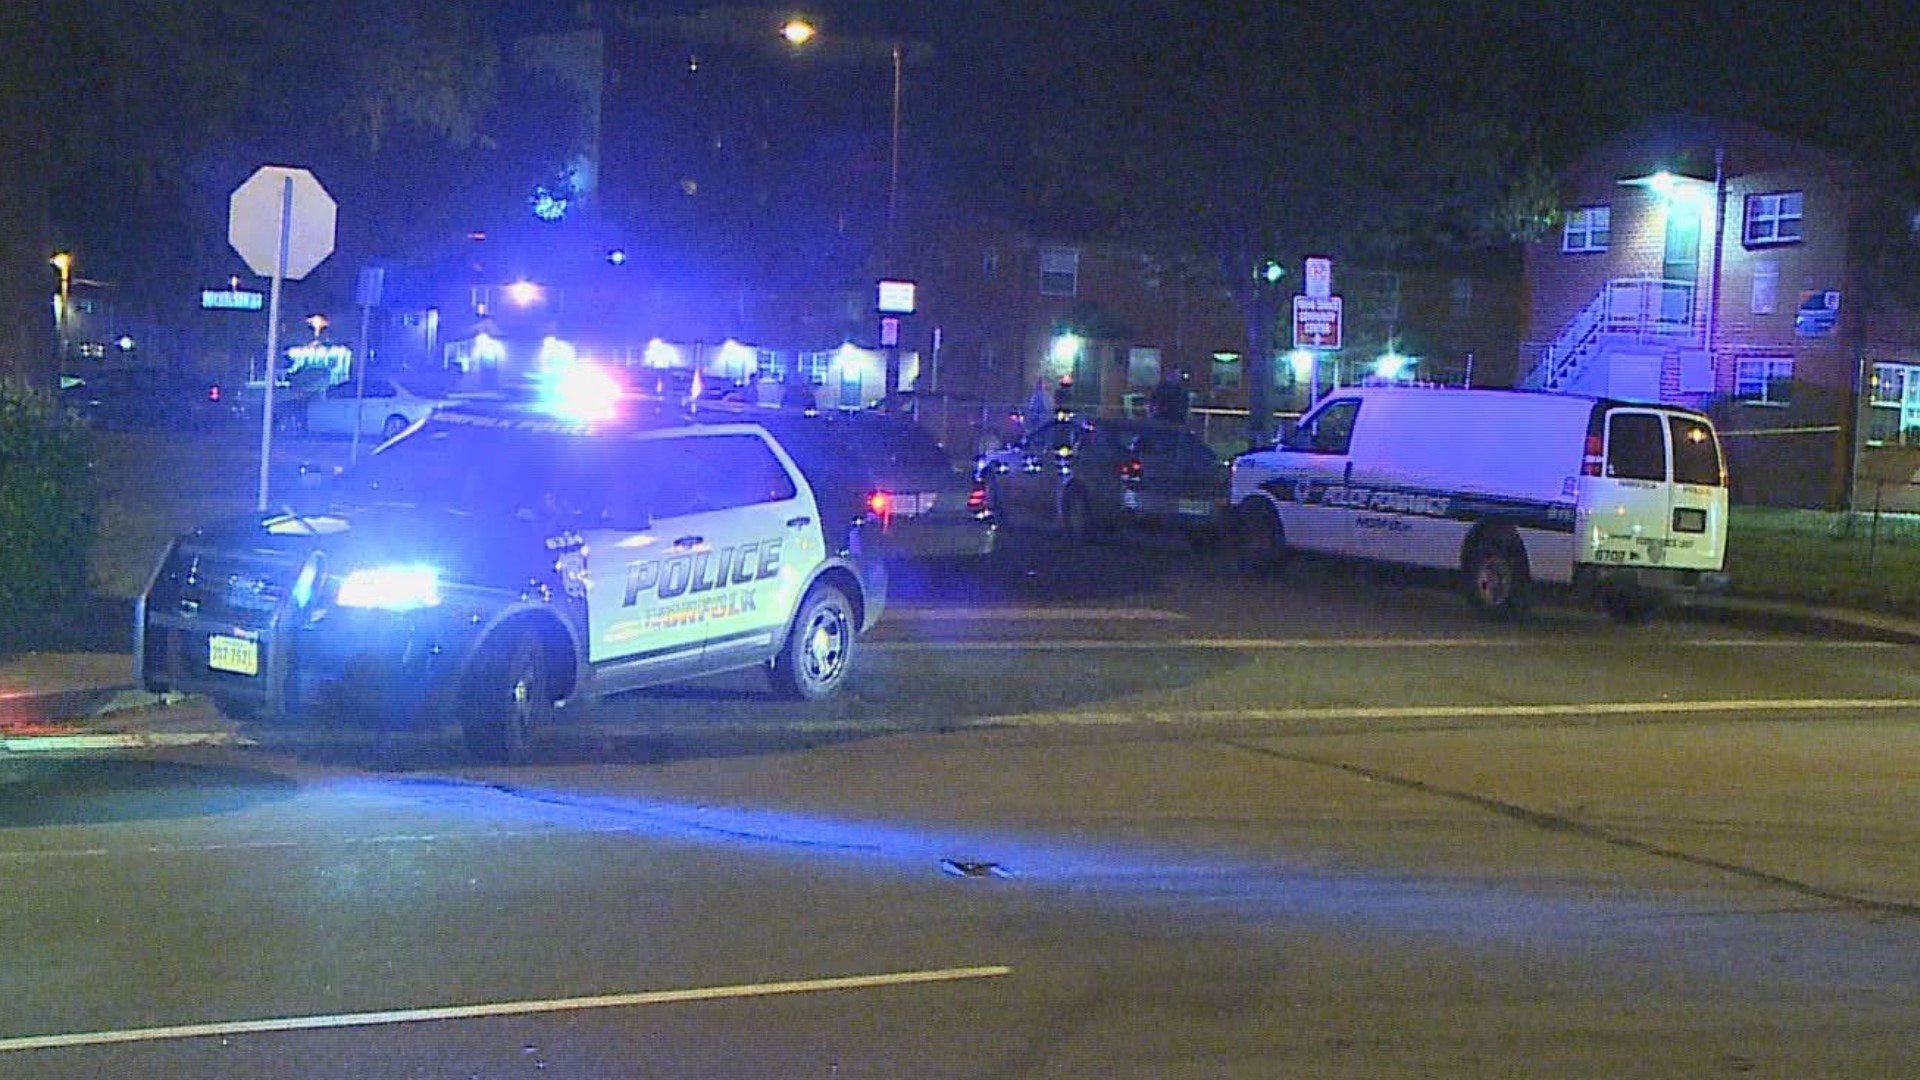 According to emergency dispatchers, one person was shot in the 200 block of East Virginia Beach Boulevard just after 1:30 a.m. Tuesday. The victim is expected to be OK.